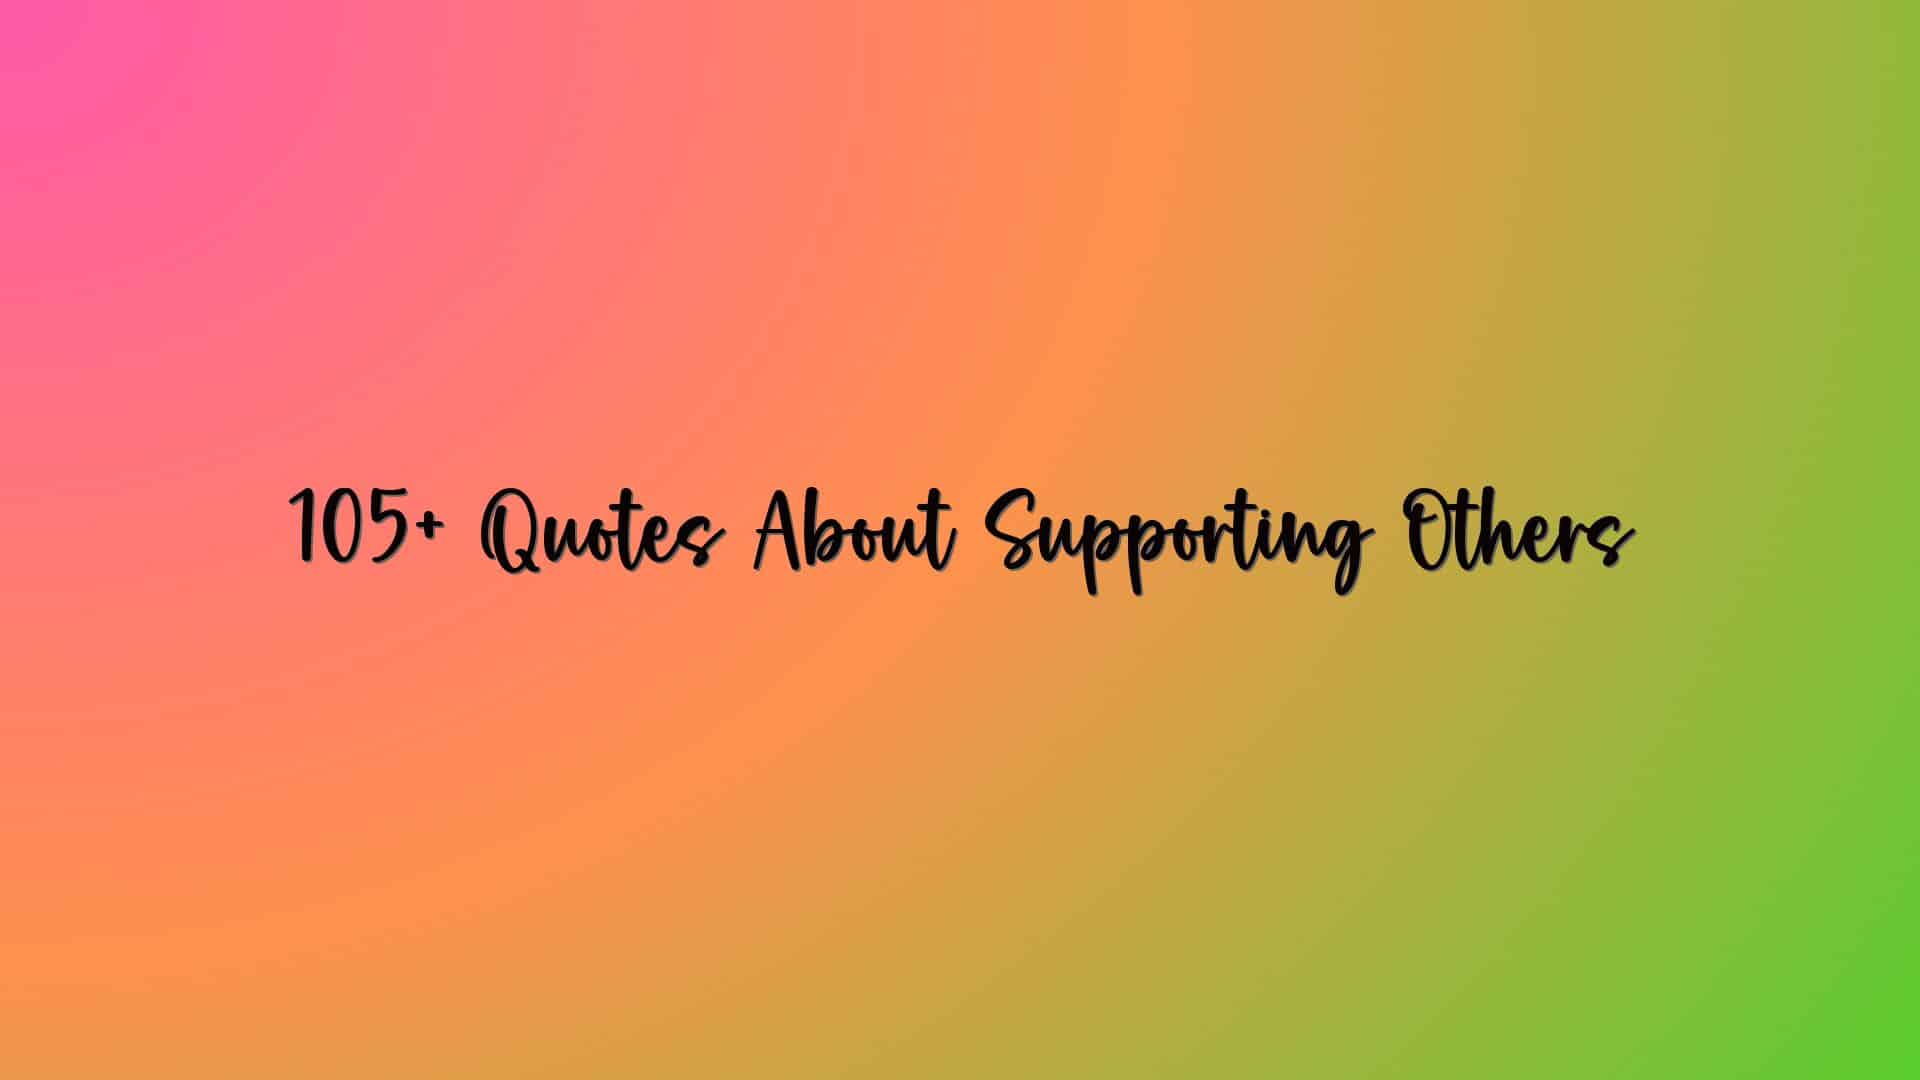 105+ Quotes About Supporting Others